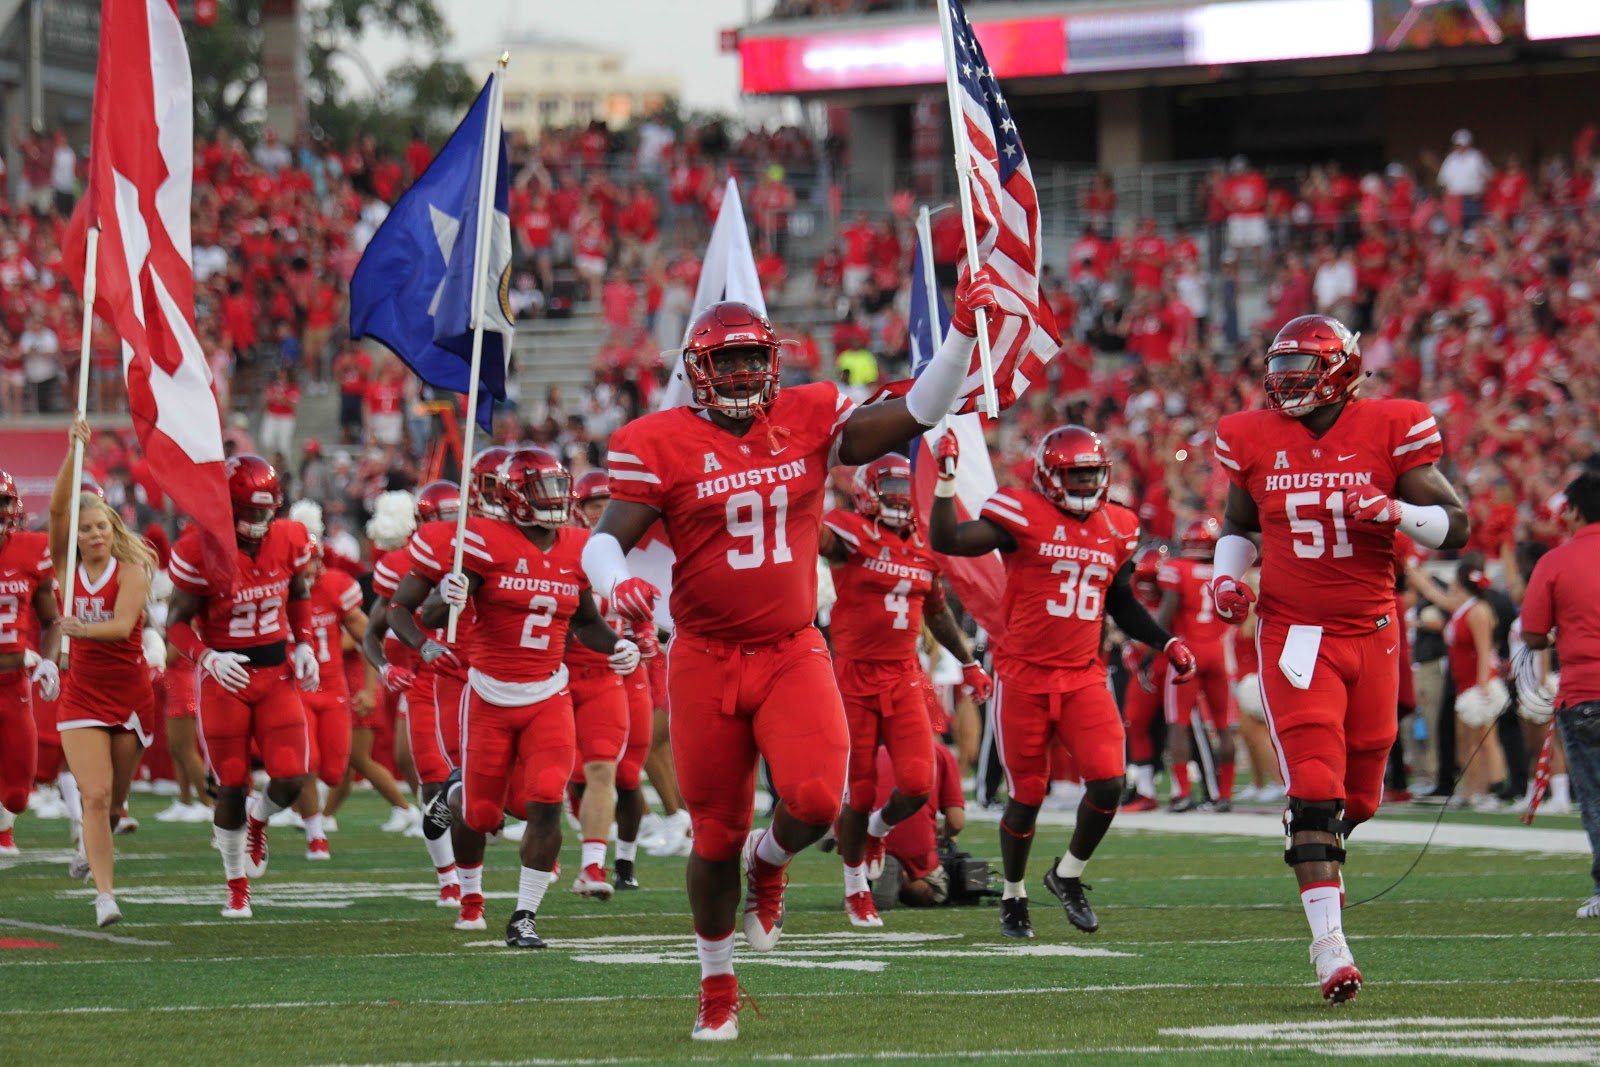 Offensive lineman Carson Walker signed his letter of intent for the UH football team on Dec. 16, 2020. | File photo